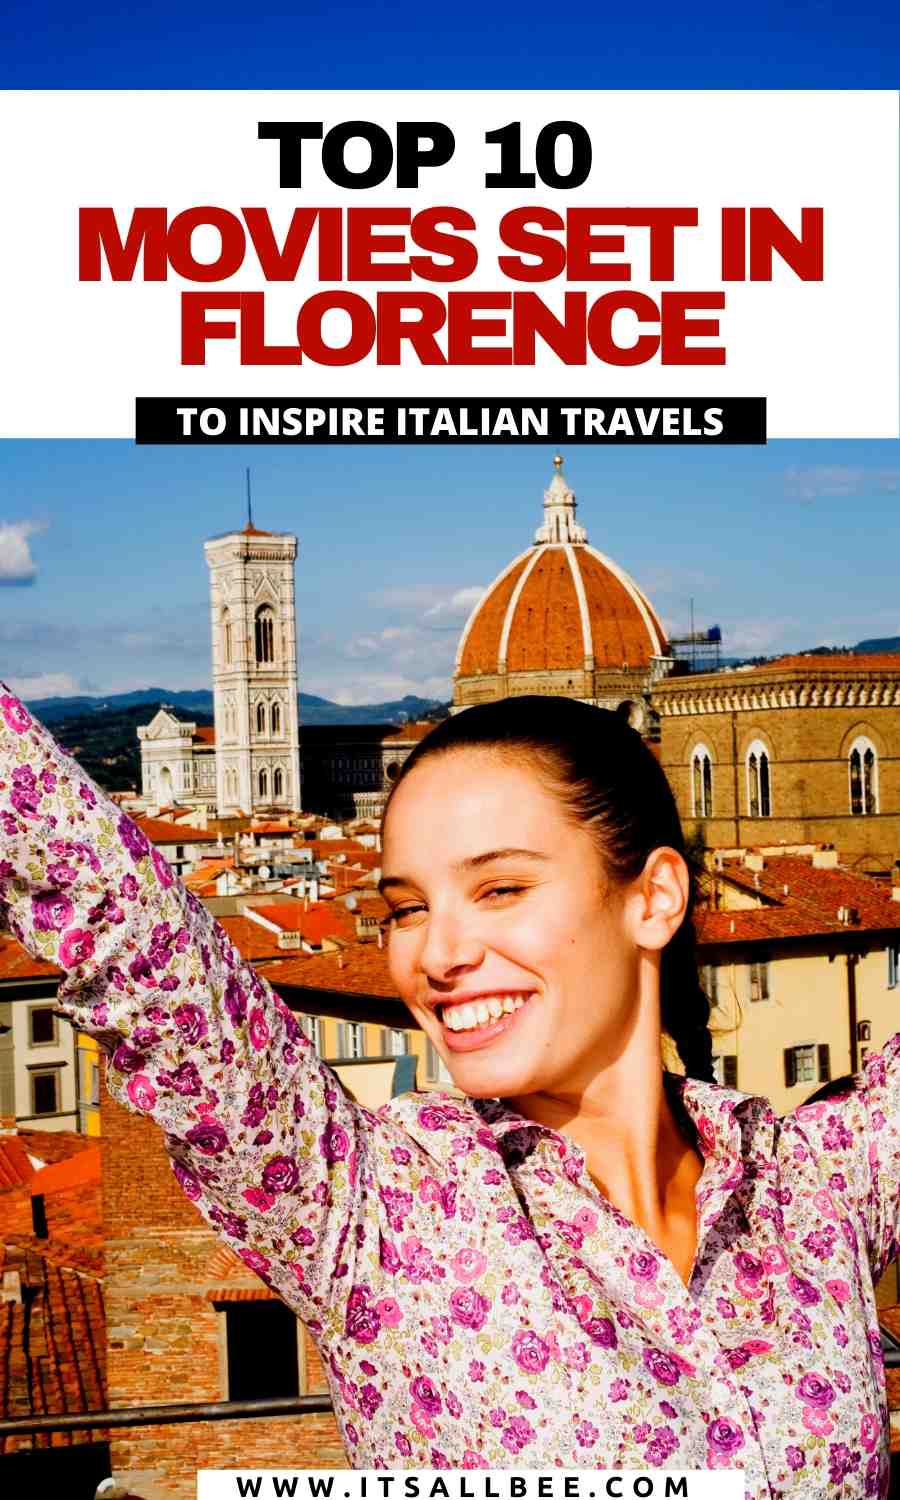 Top 10 Movies Set In Florence Italy - ItsAllBee | Solo Travel